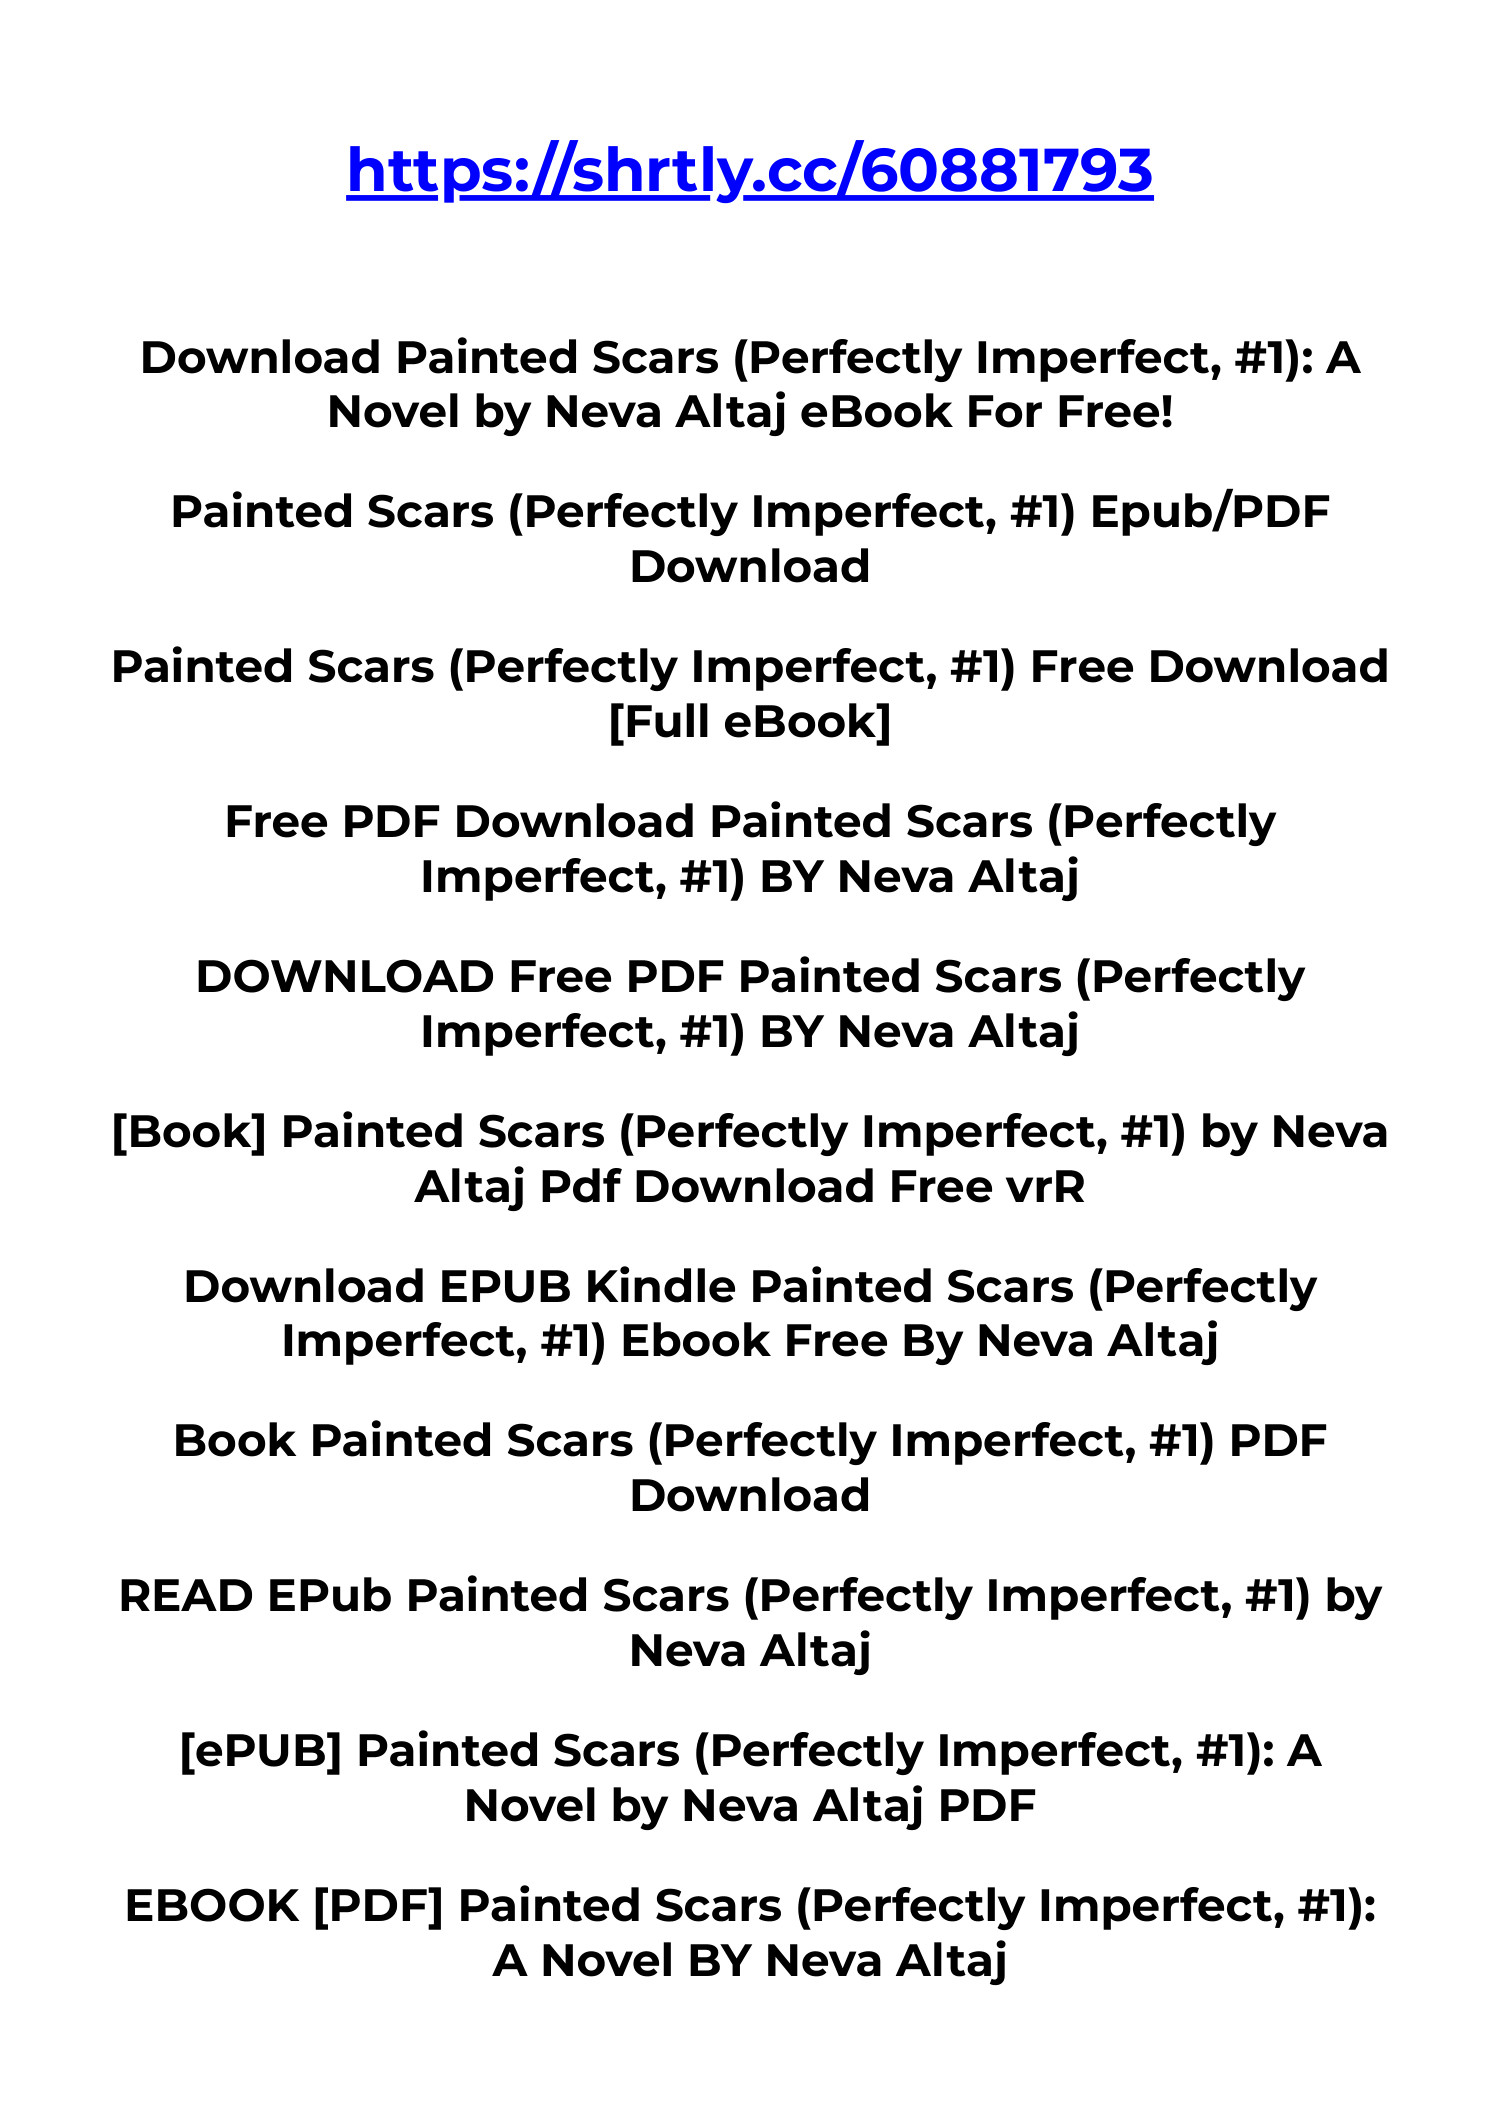 Download PDF Painted Scars (Perfectly Imperfect, #1) Ebook Free By Neva  Altaj.pdf